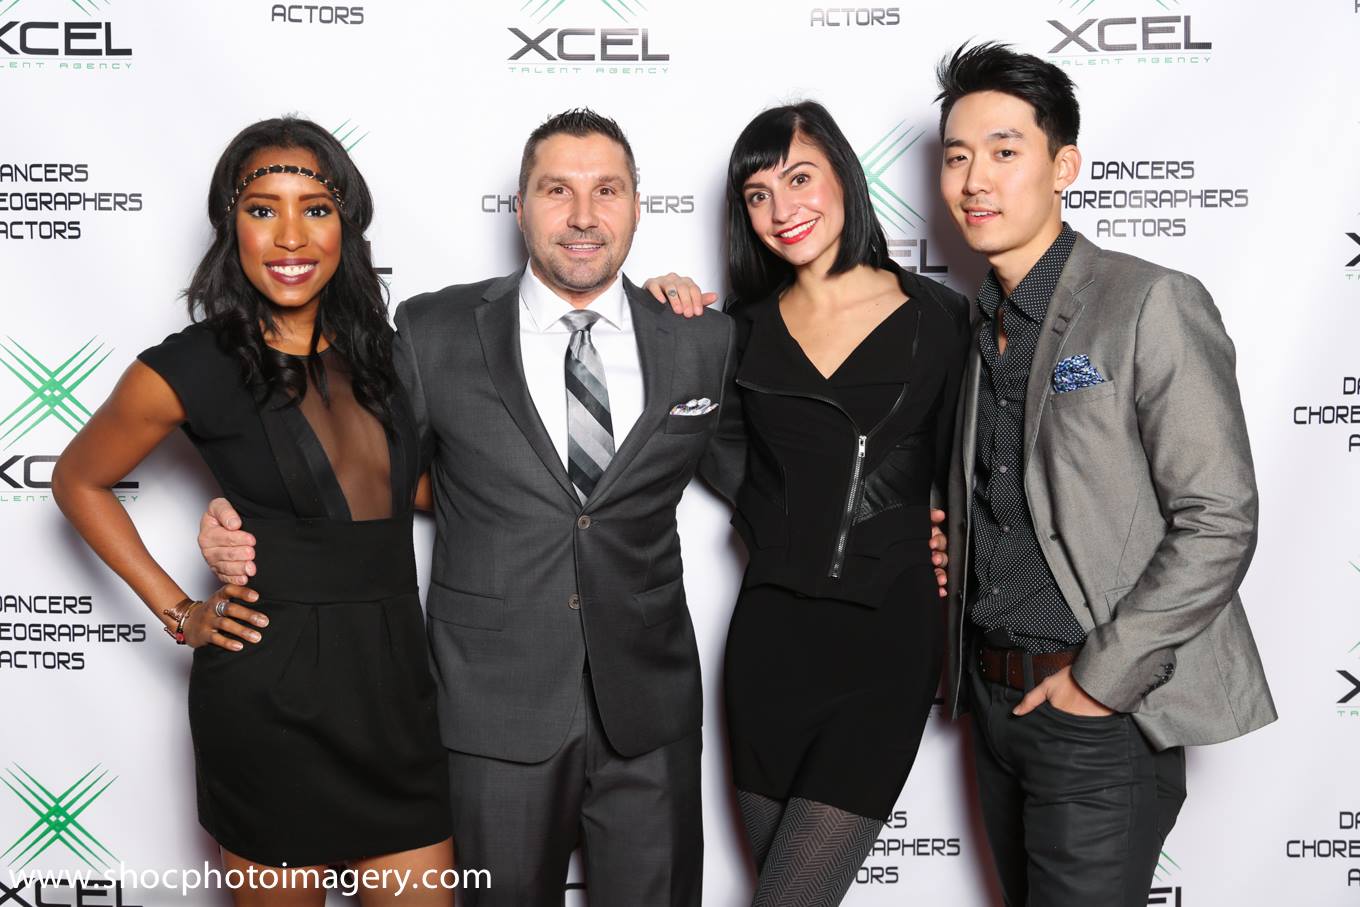 (left to right) Andrea Laing, Ares Golemi, Kylie Casciano, Dior C. Choi